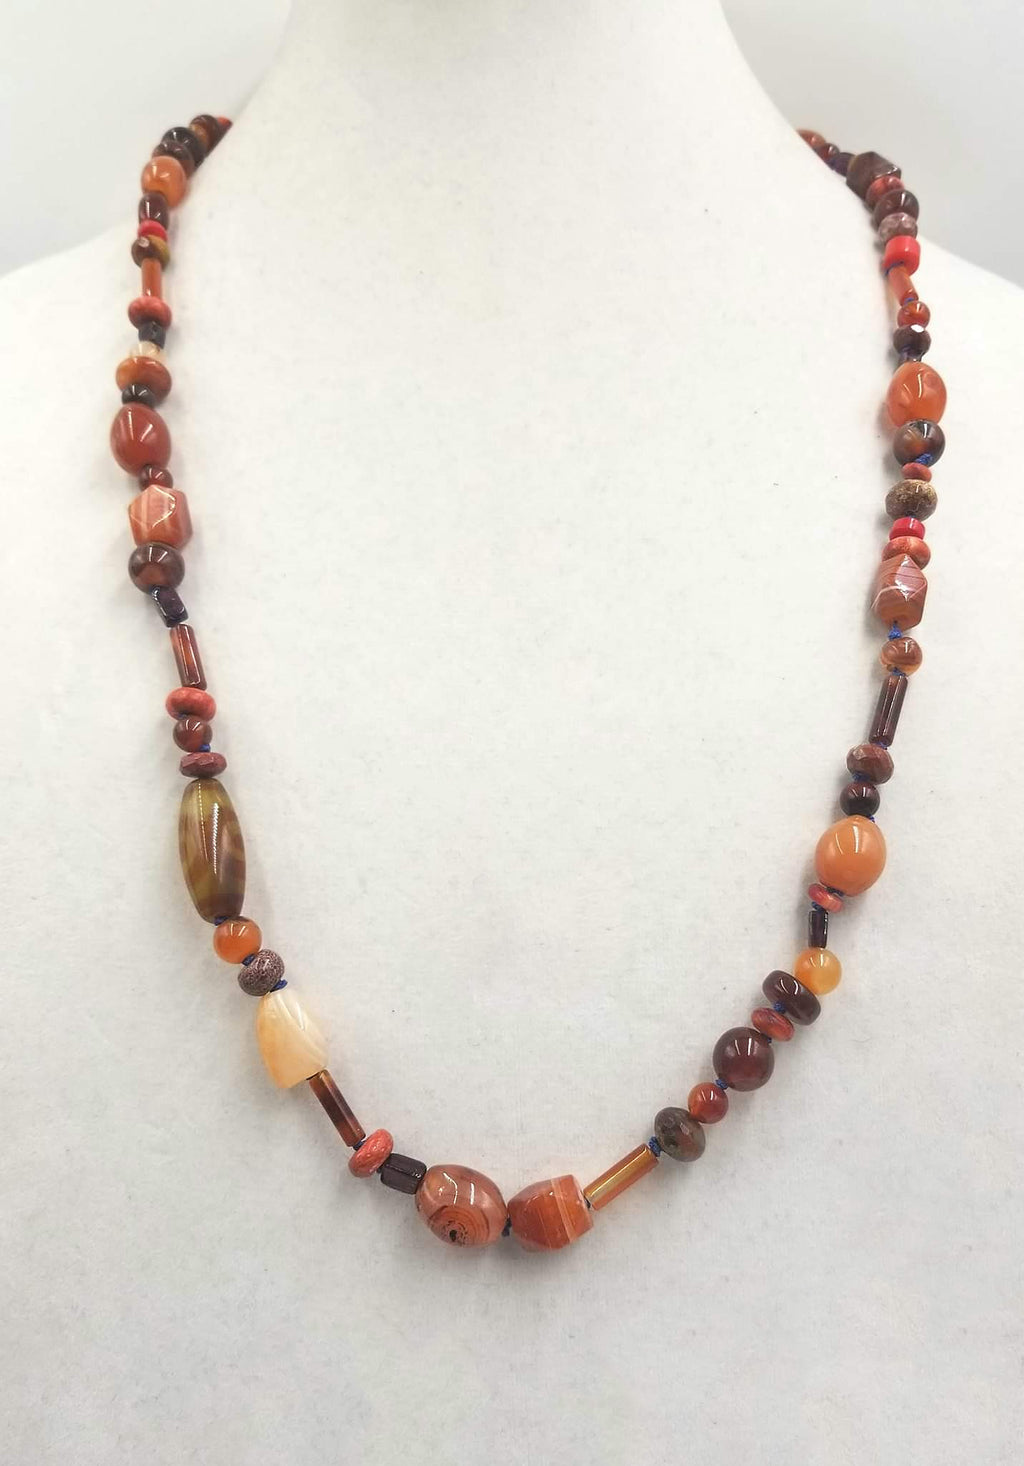 Agate, coral, tiger's eye, carnelian rope necklace, hand-knotted with periwinkle silk. 30" length.